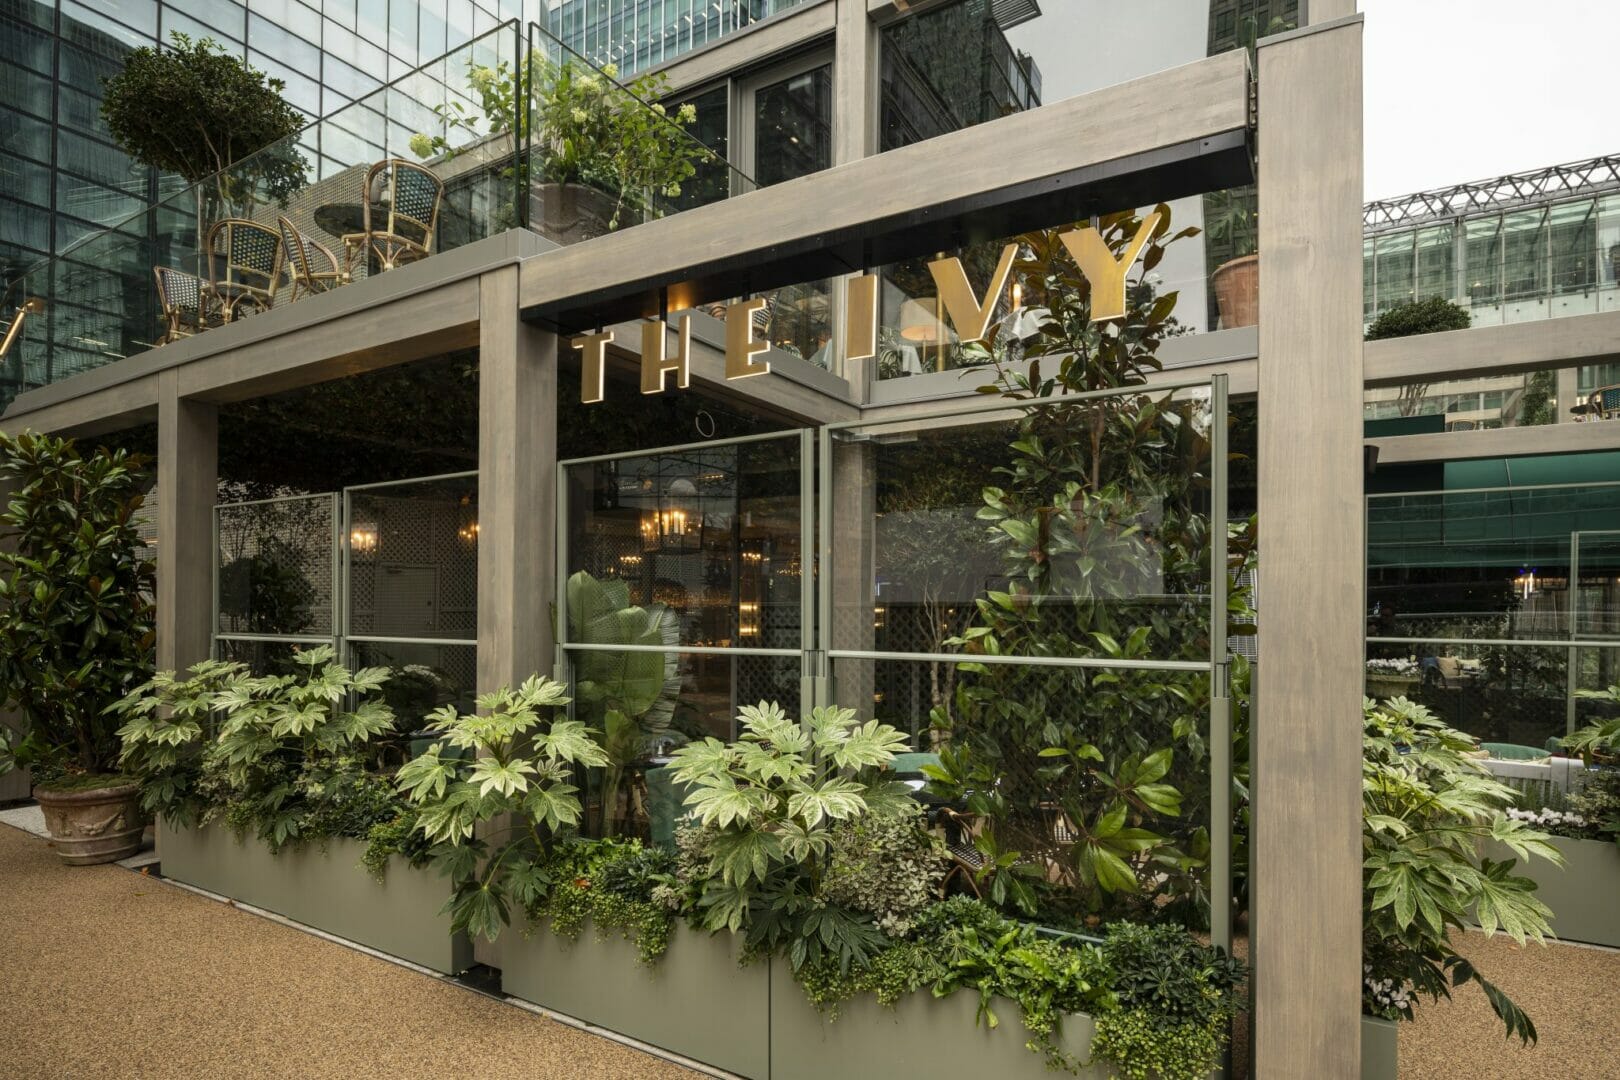 Accoya® selected for the latest Ivy Collection restaurant opening